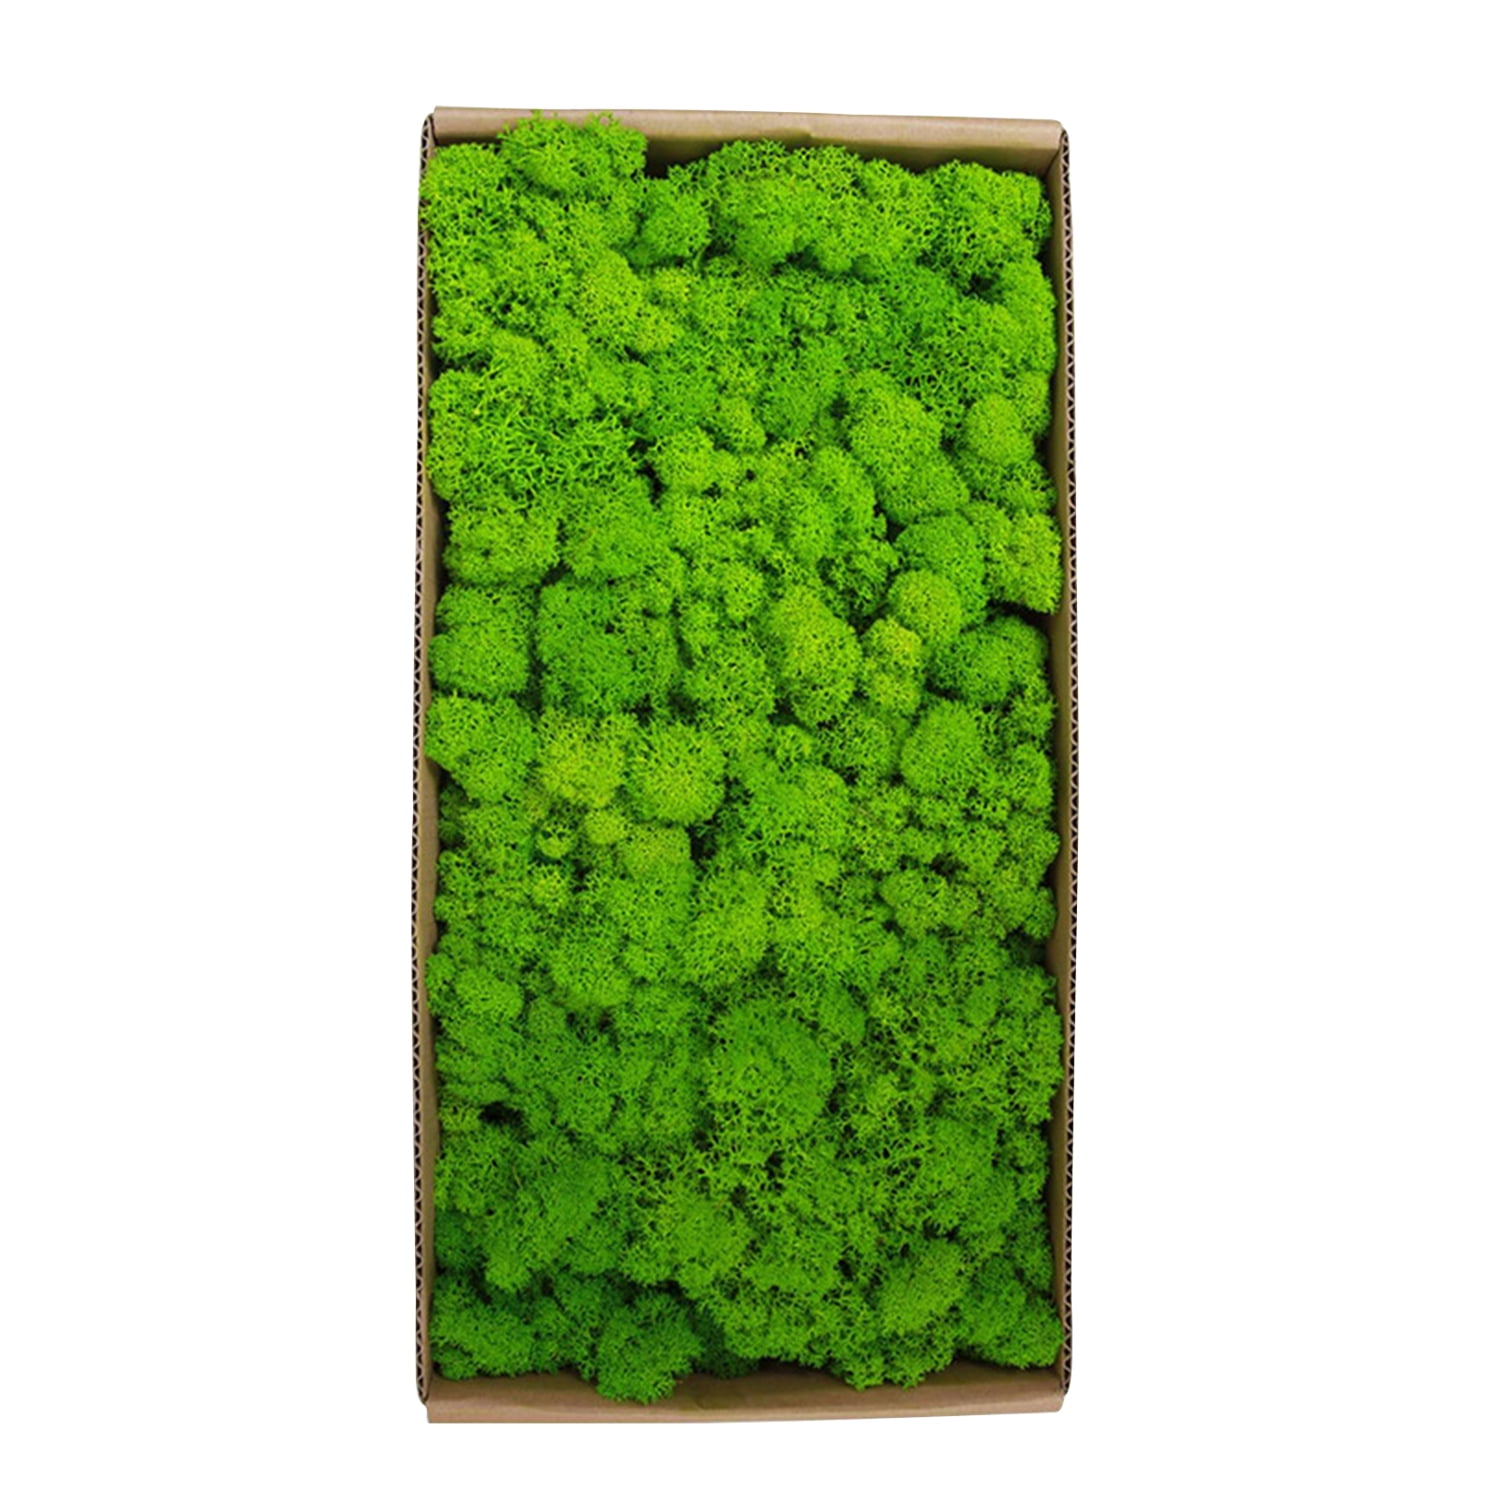 Preserved Moss Wall Decor Real Preserved Moss No Maintenance Required Naturally Preserved Moss for Home Wall Party Festivals Crafts Xmas Indoor Office Decoration Funien